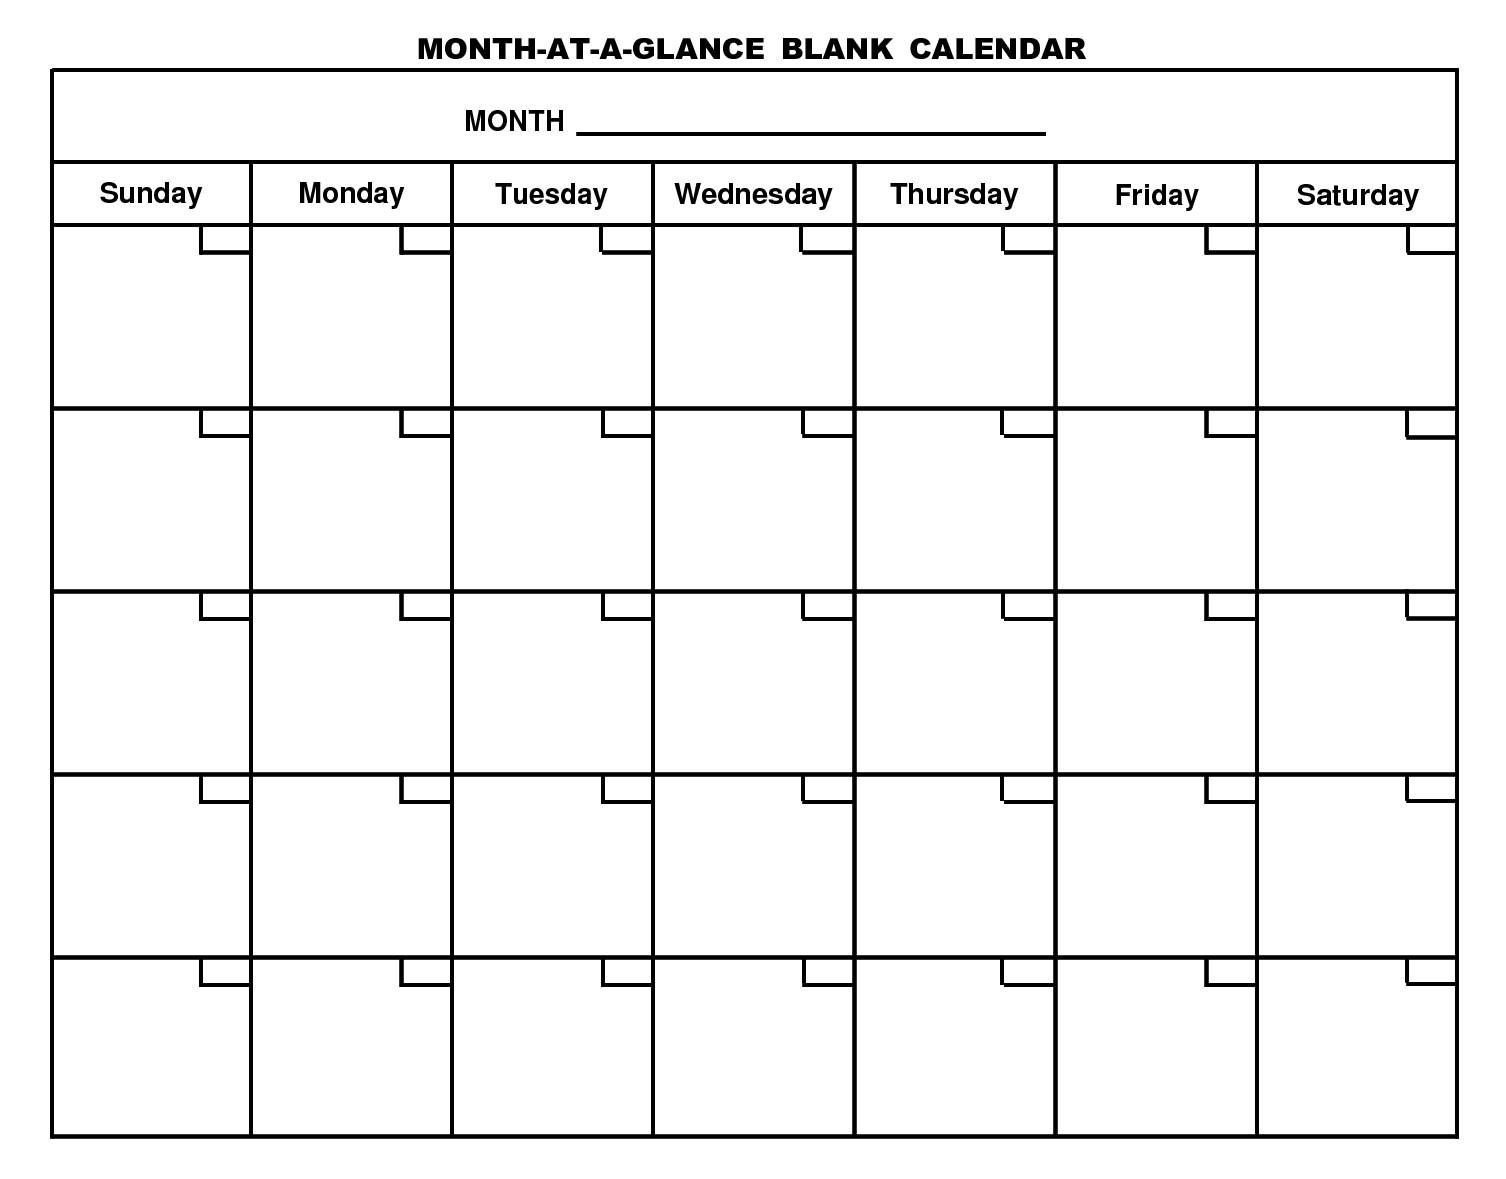 Free Printable Monthly Calendar With Large Boxes Skymaps-Blank Month At A Glance Printable Calendar